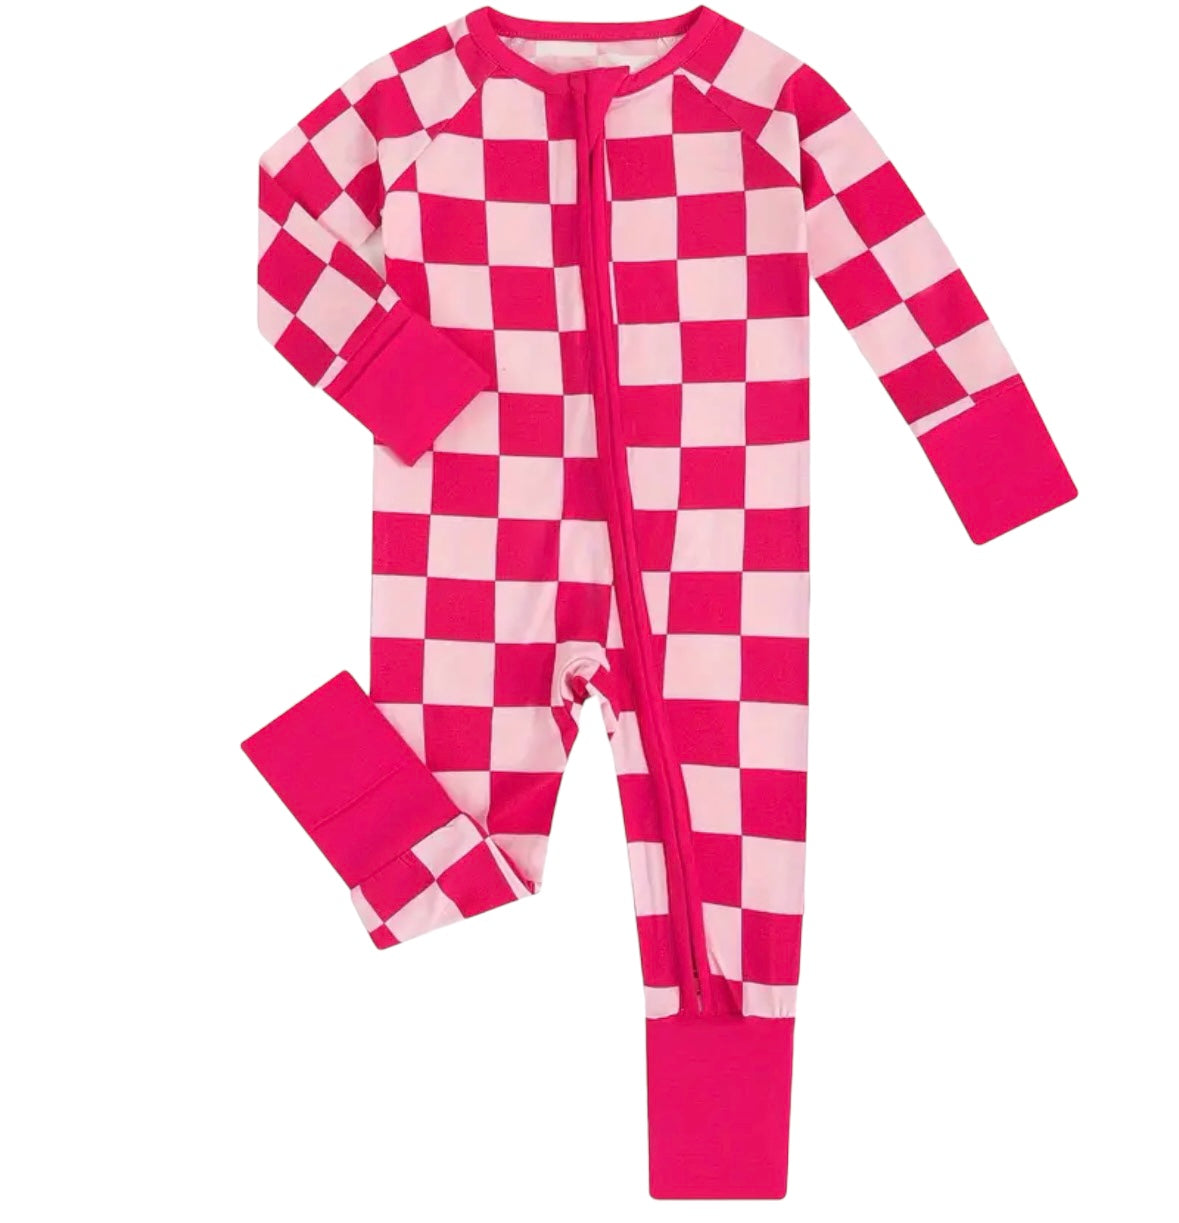 Checked out infant/toddler bamboo pjs